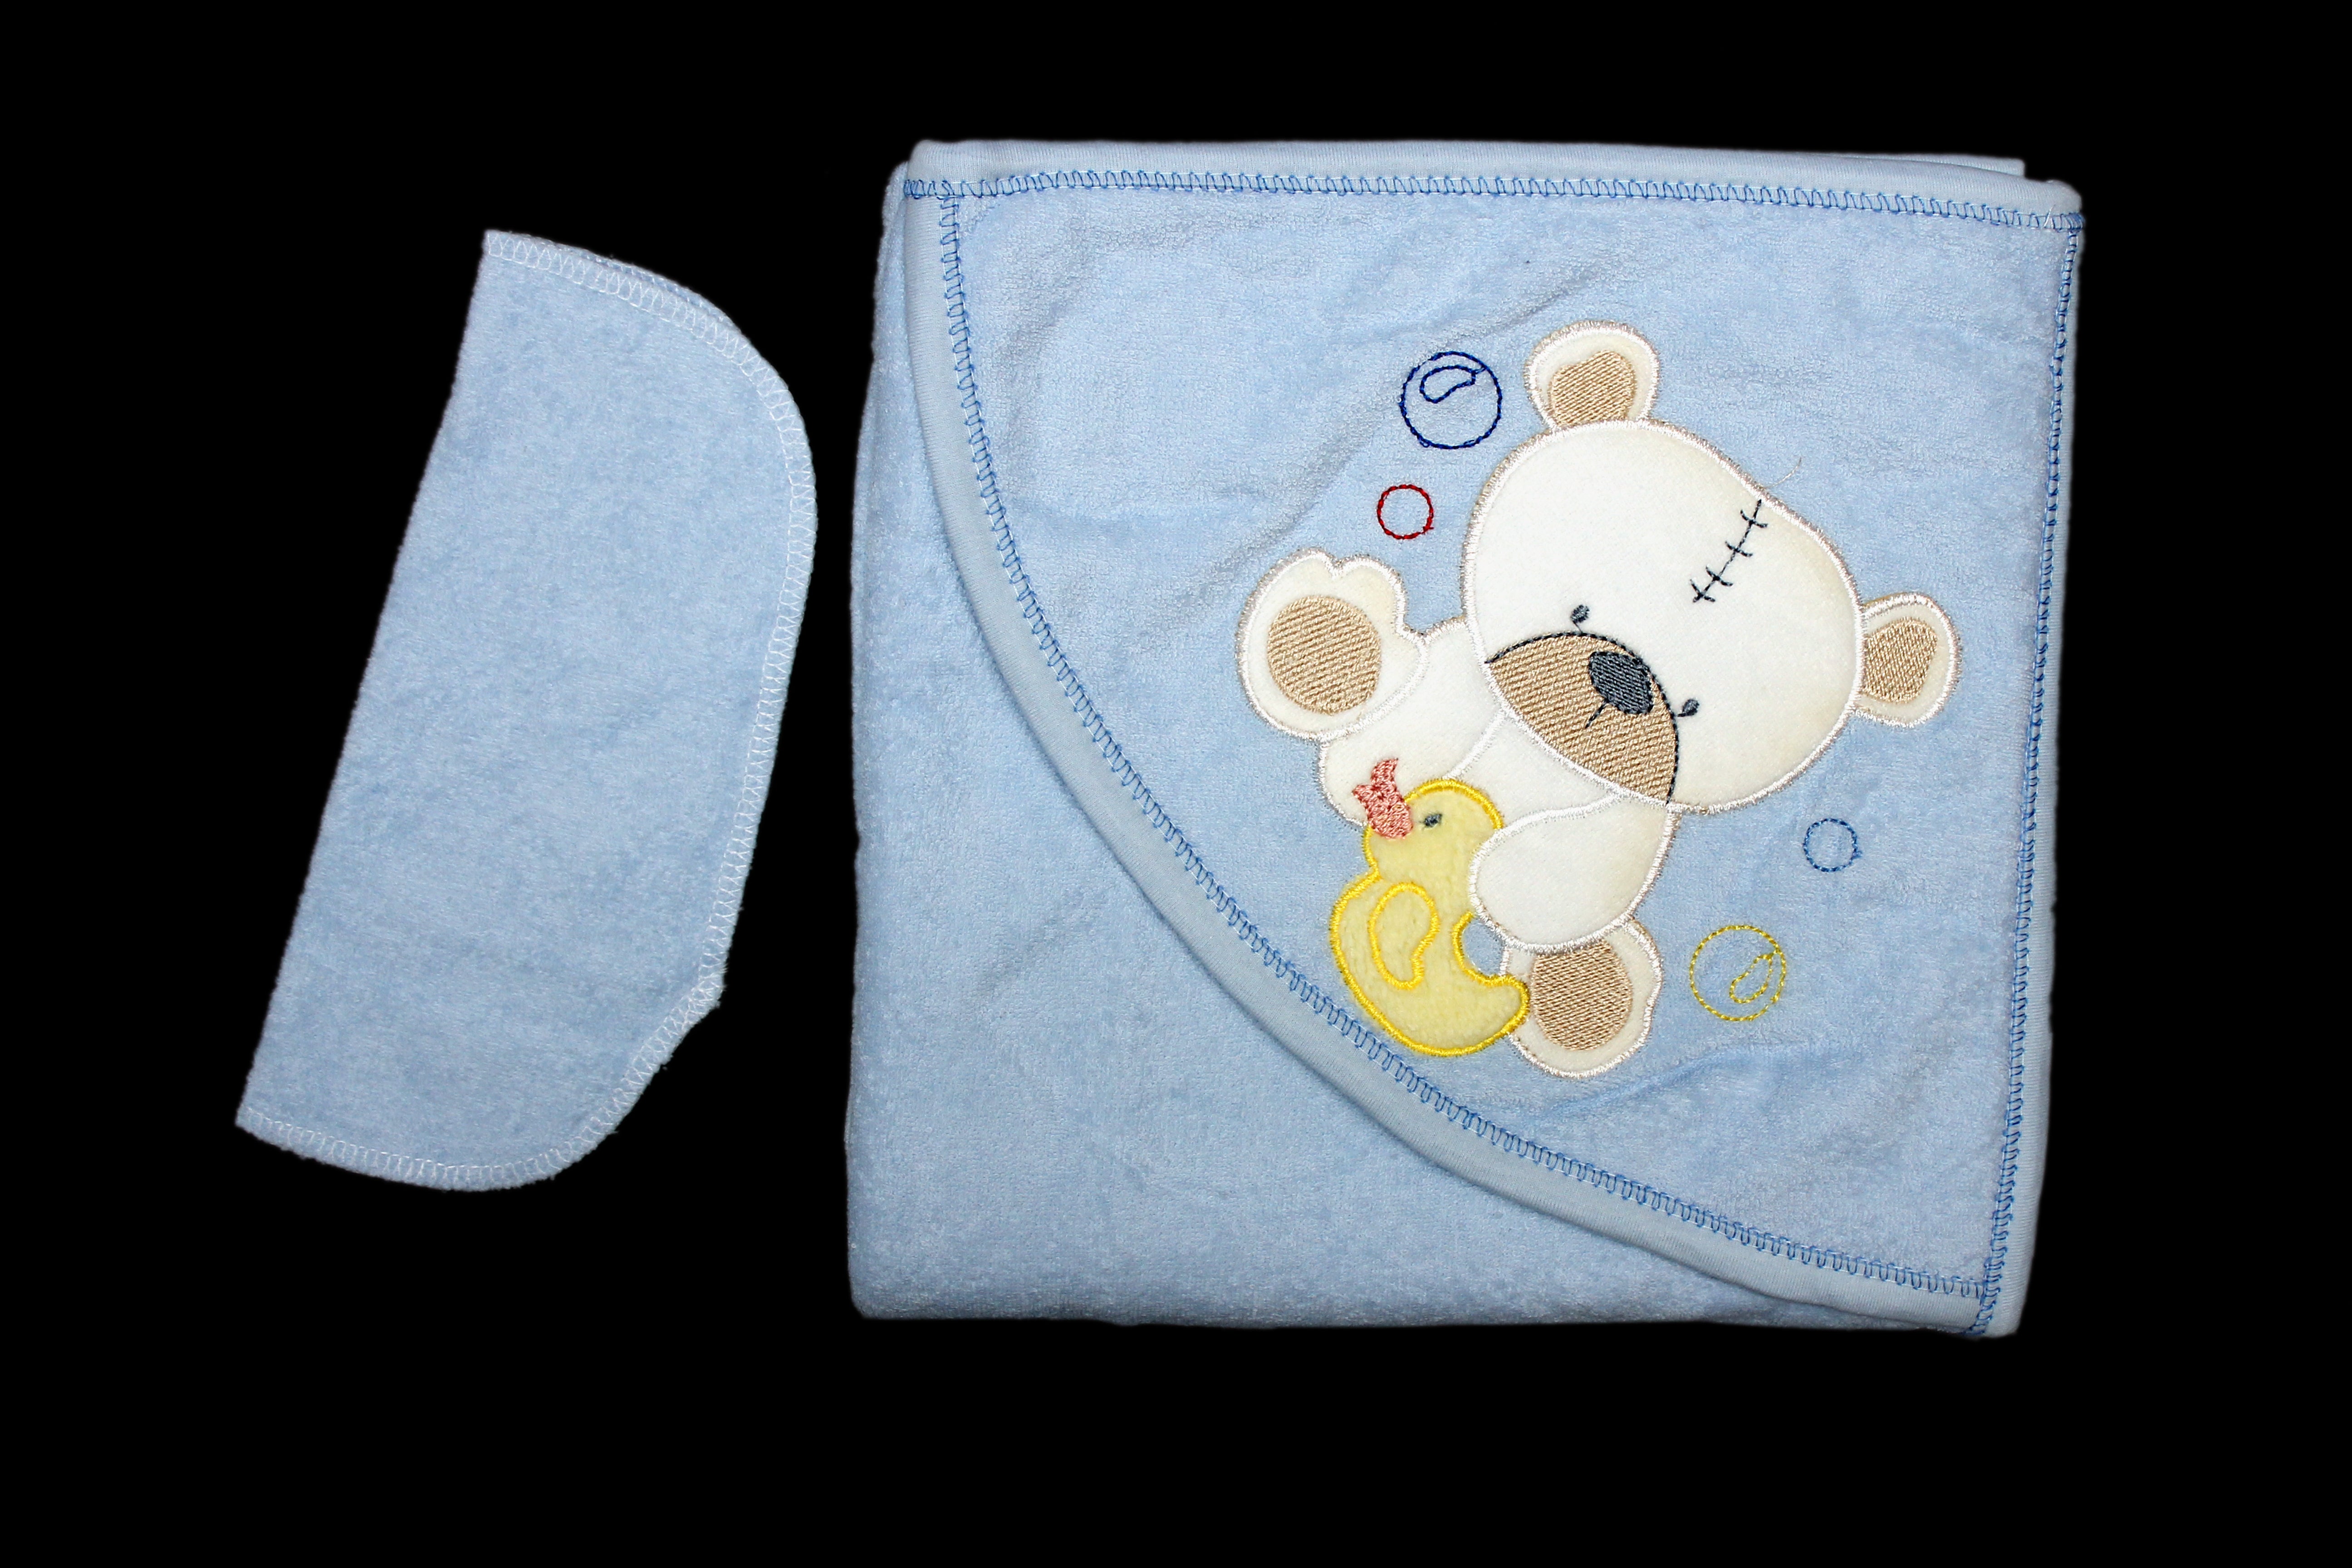 BABY HOODED BATH TOWEL WITH FACE TOWEL - 26658